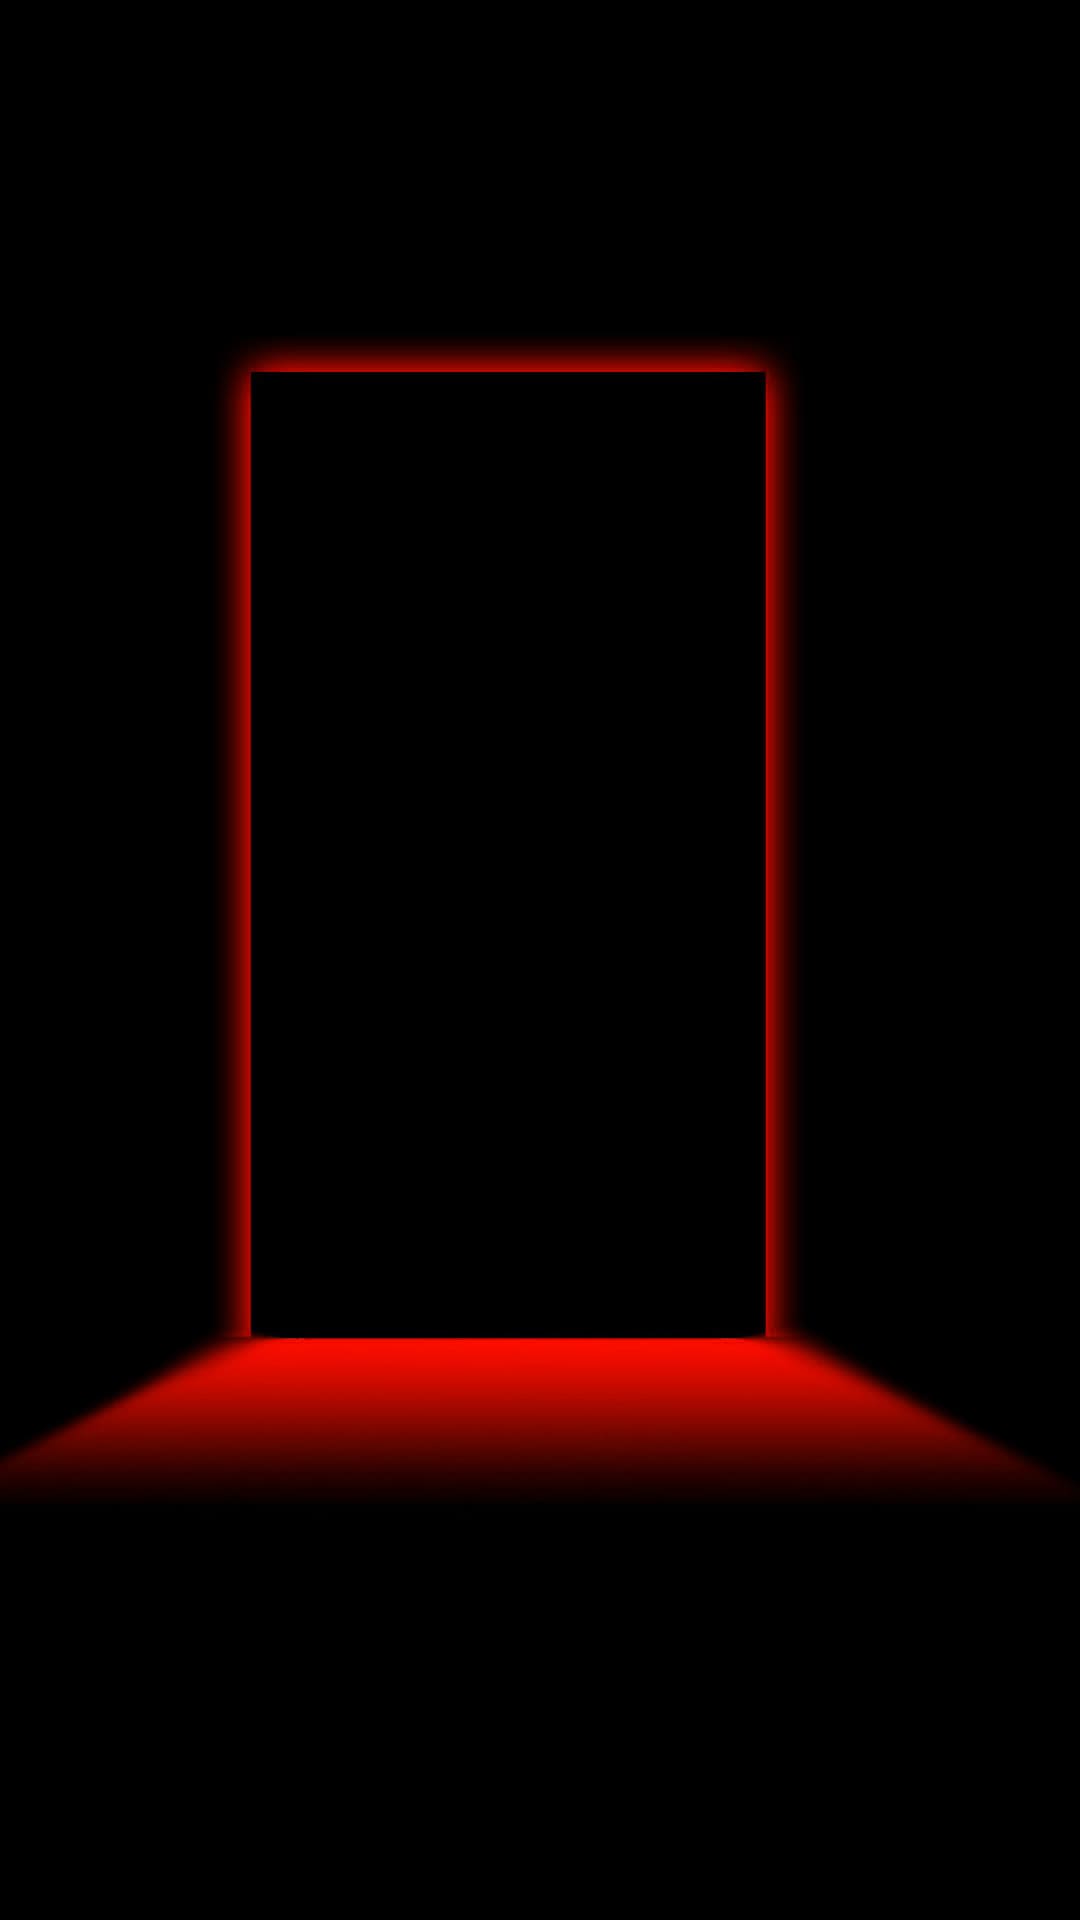 Red and Black Wallpapers